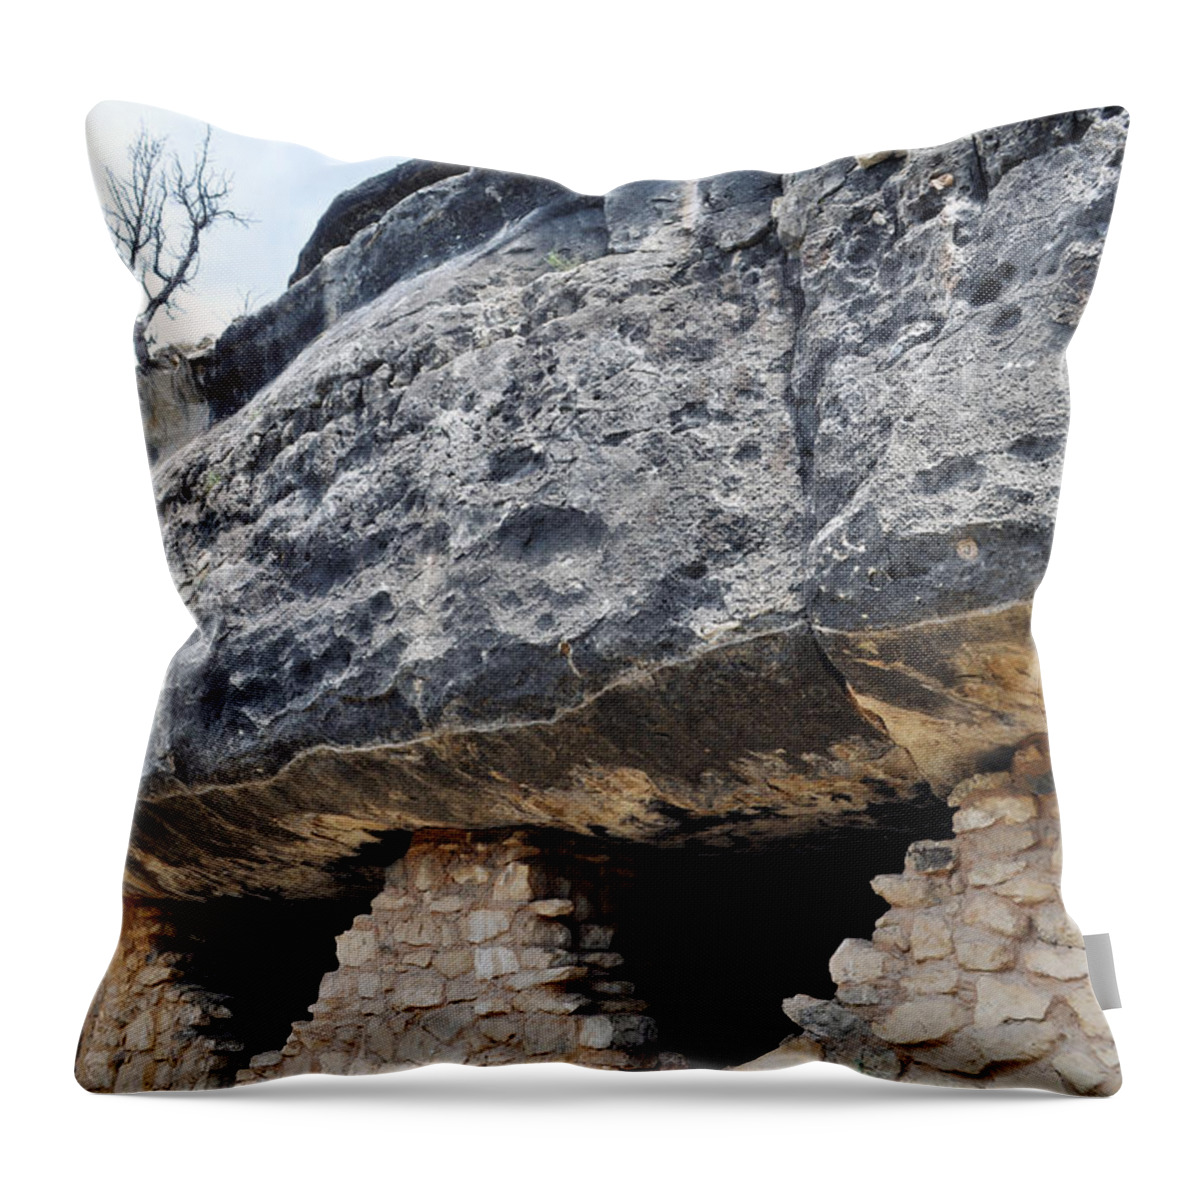 Walnut Canyon National Monument Throw Pillow featuring the photograph Walnut Canyon National Monument Cliff Dwellings by Kyle Hanson